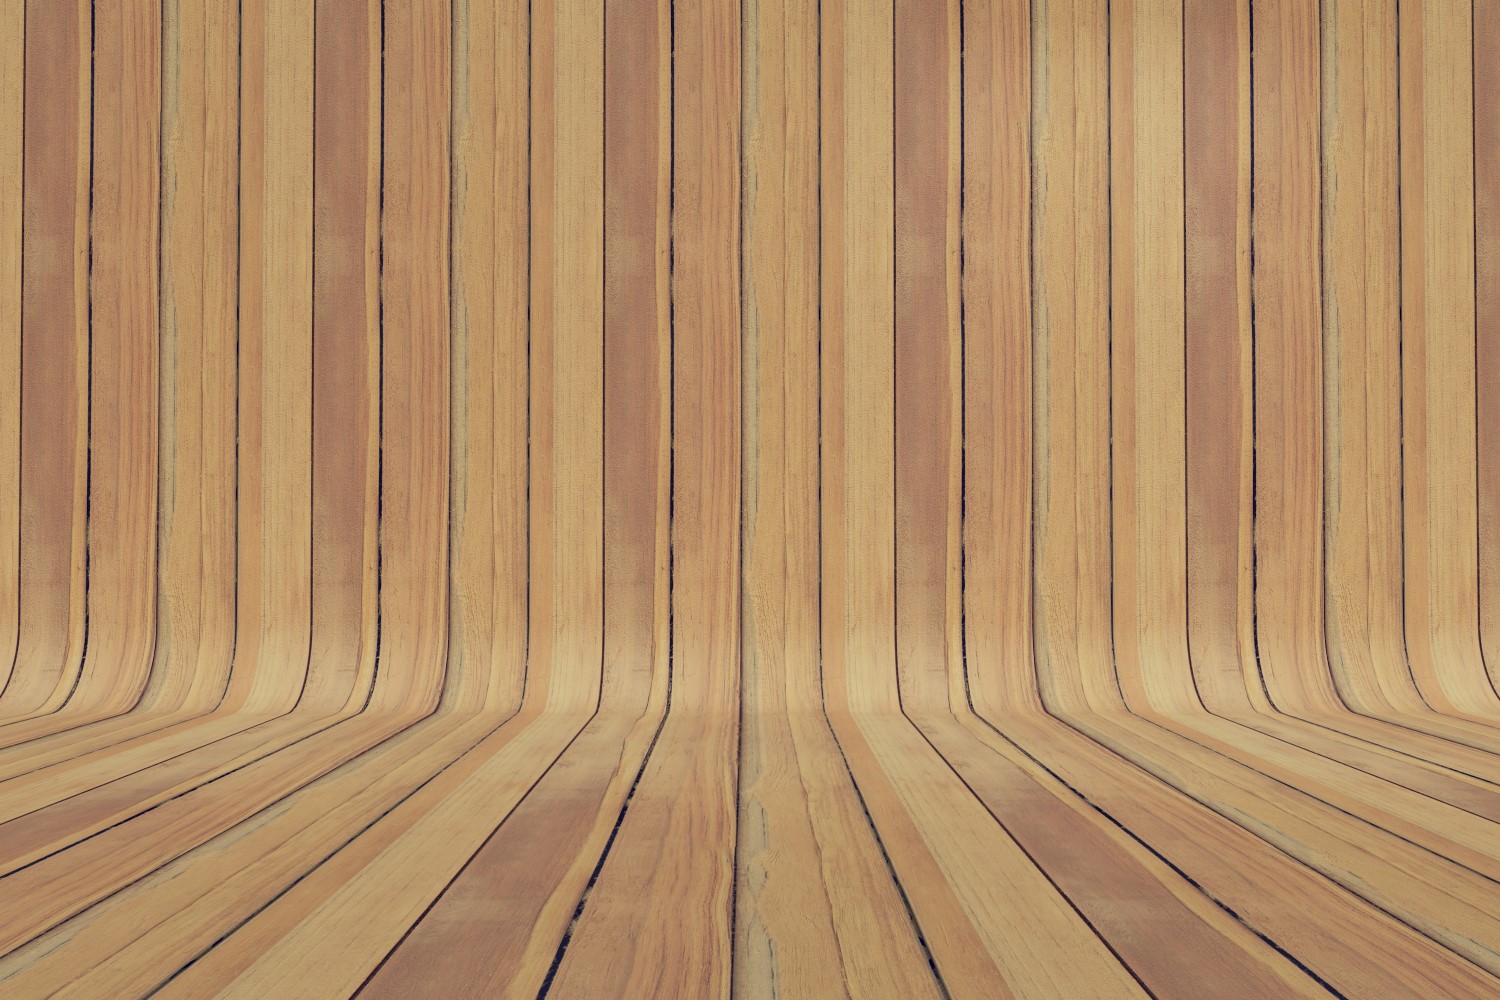 Curved Tan And Peru Color Wood Parquet background